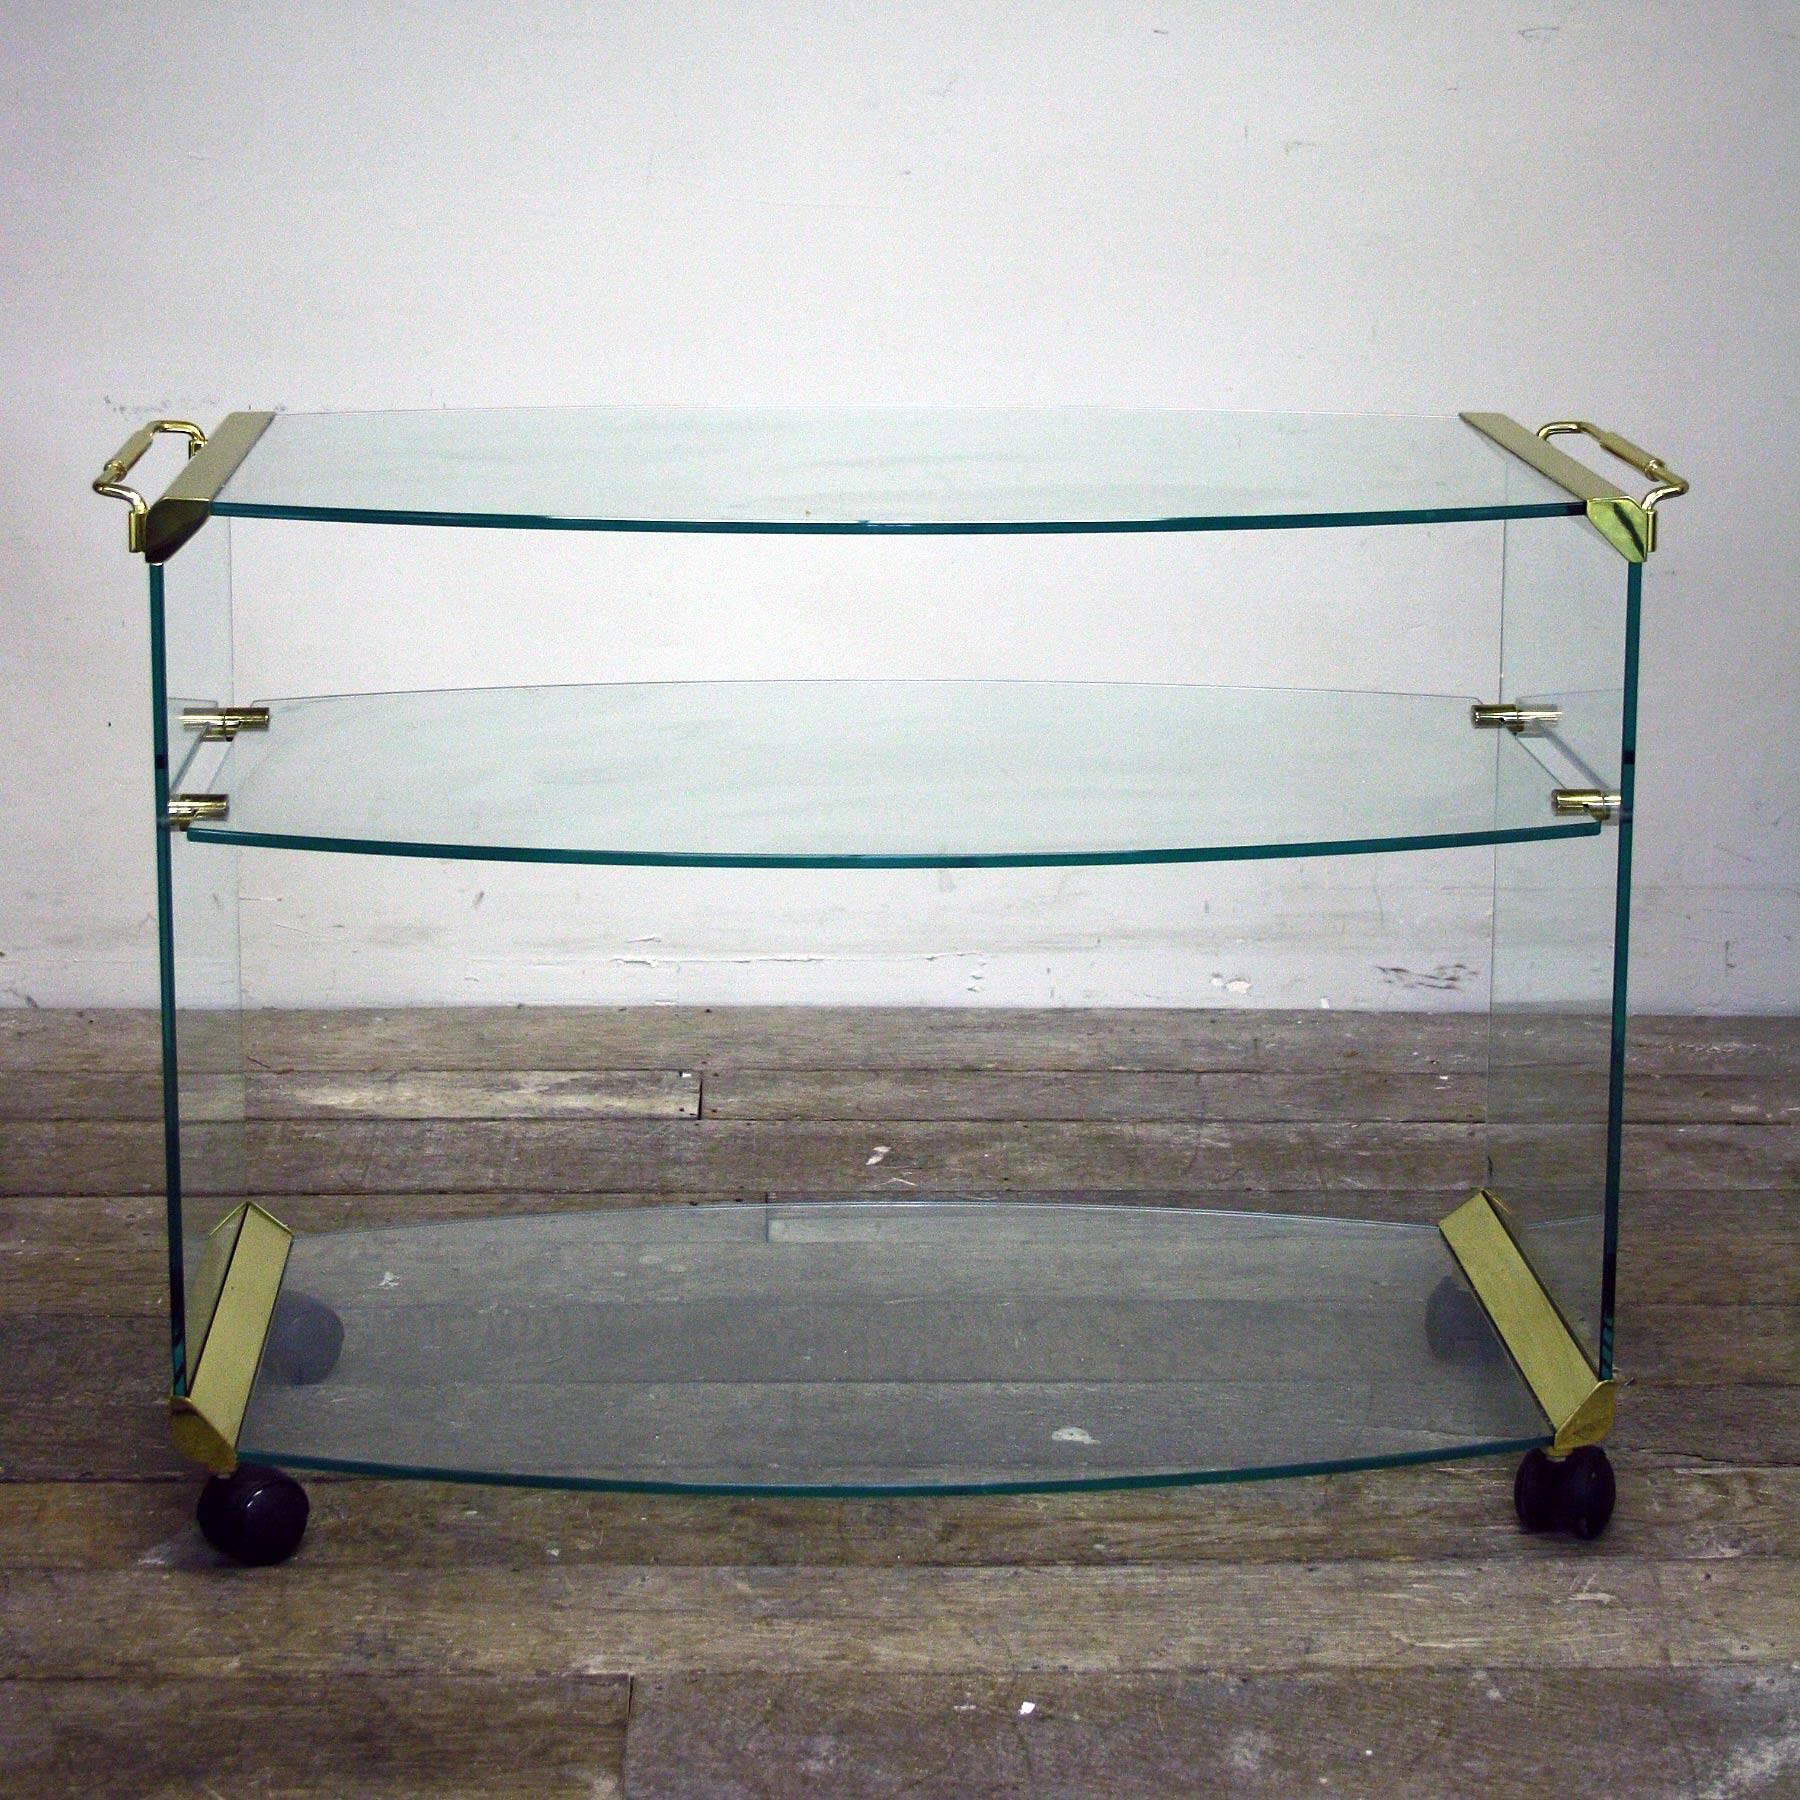 Magnificent Italian glass drinks trolley designed by Pierangelo Gallotti and produced by Gallotti & Radice during the 1980s.

The drinks trolly comes with thick tempered transparent glass and gold colored steel handles and edges.

 